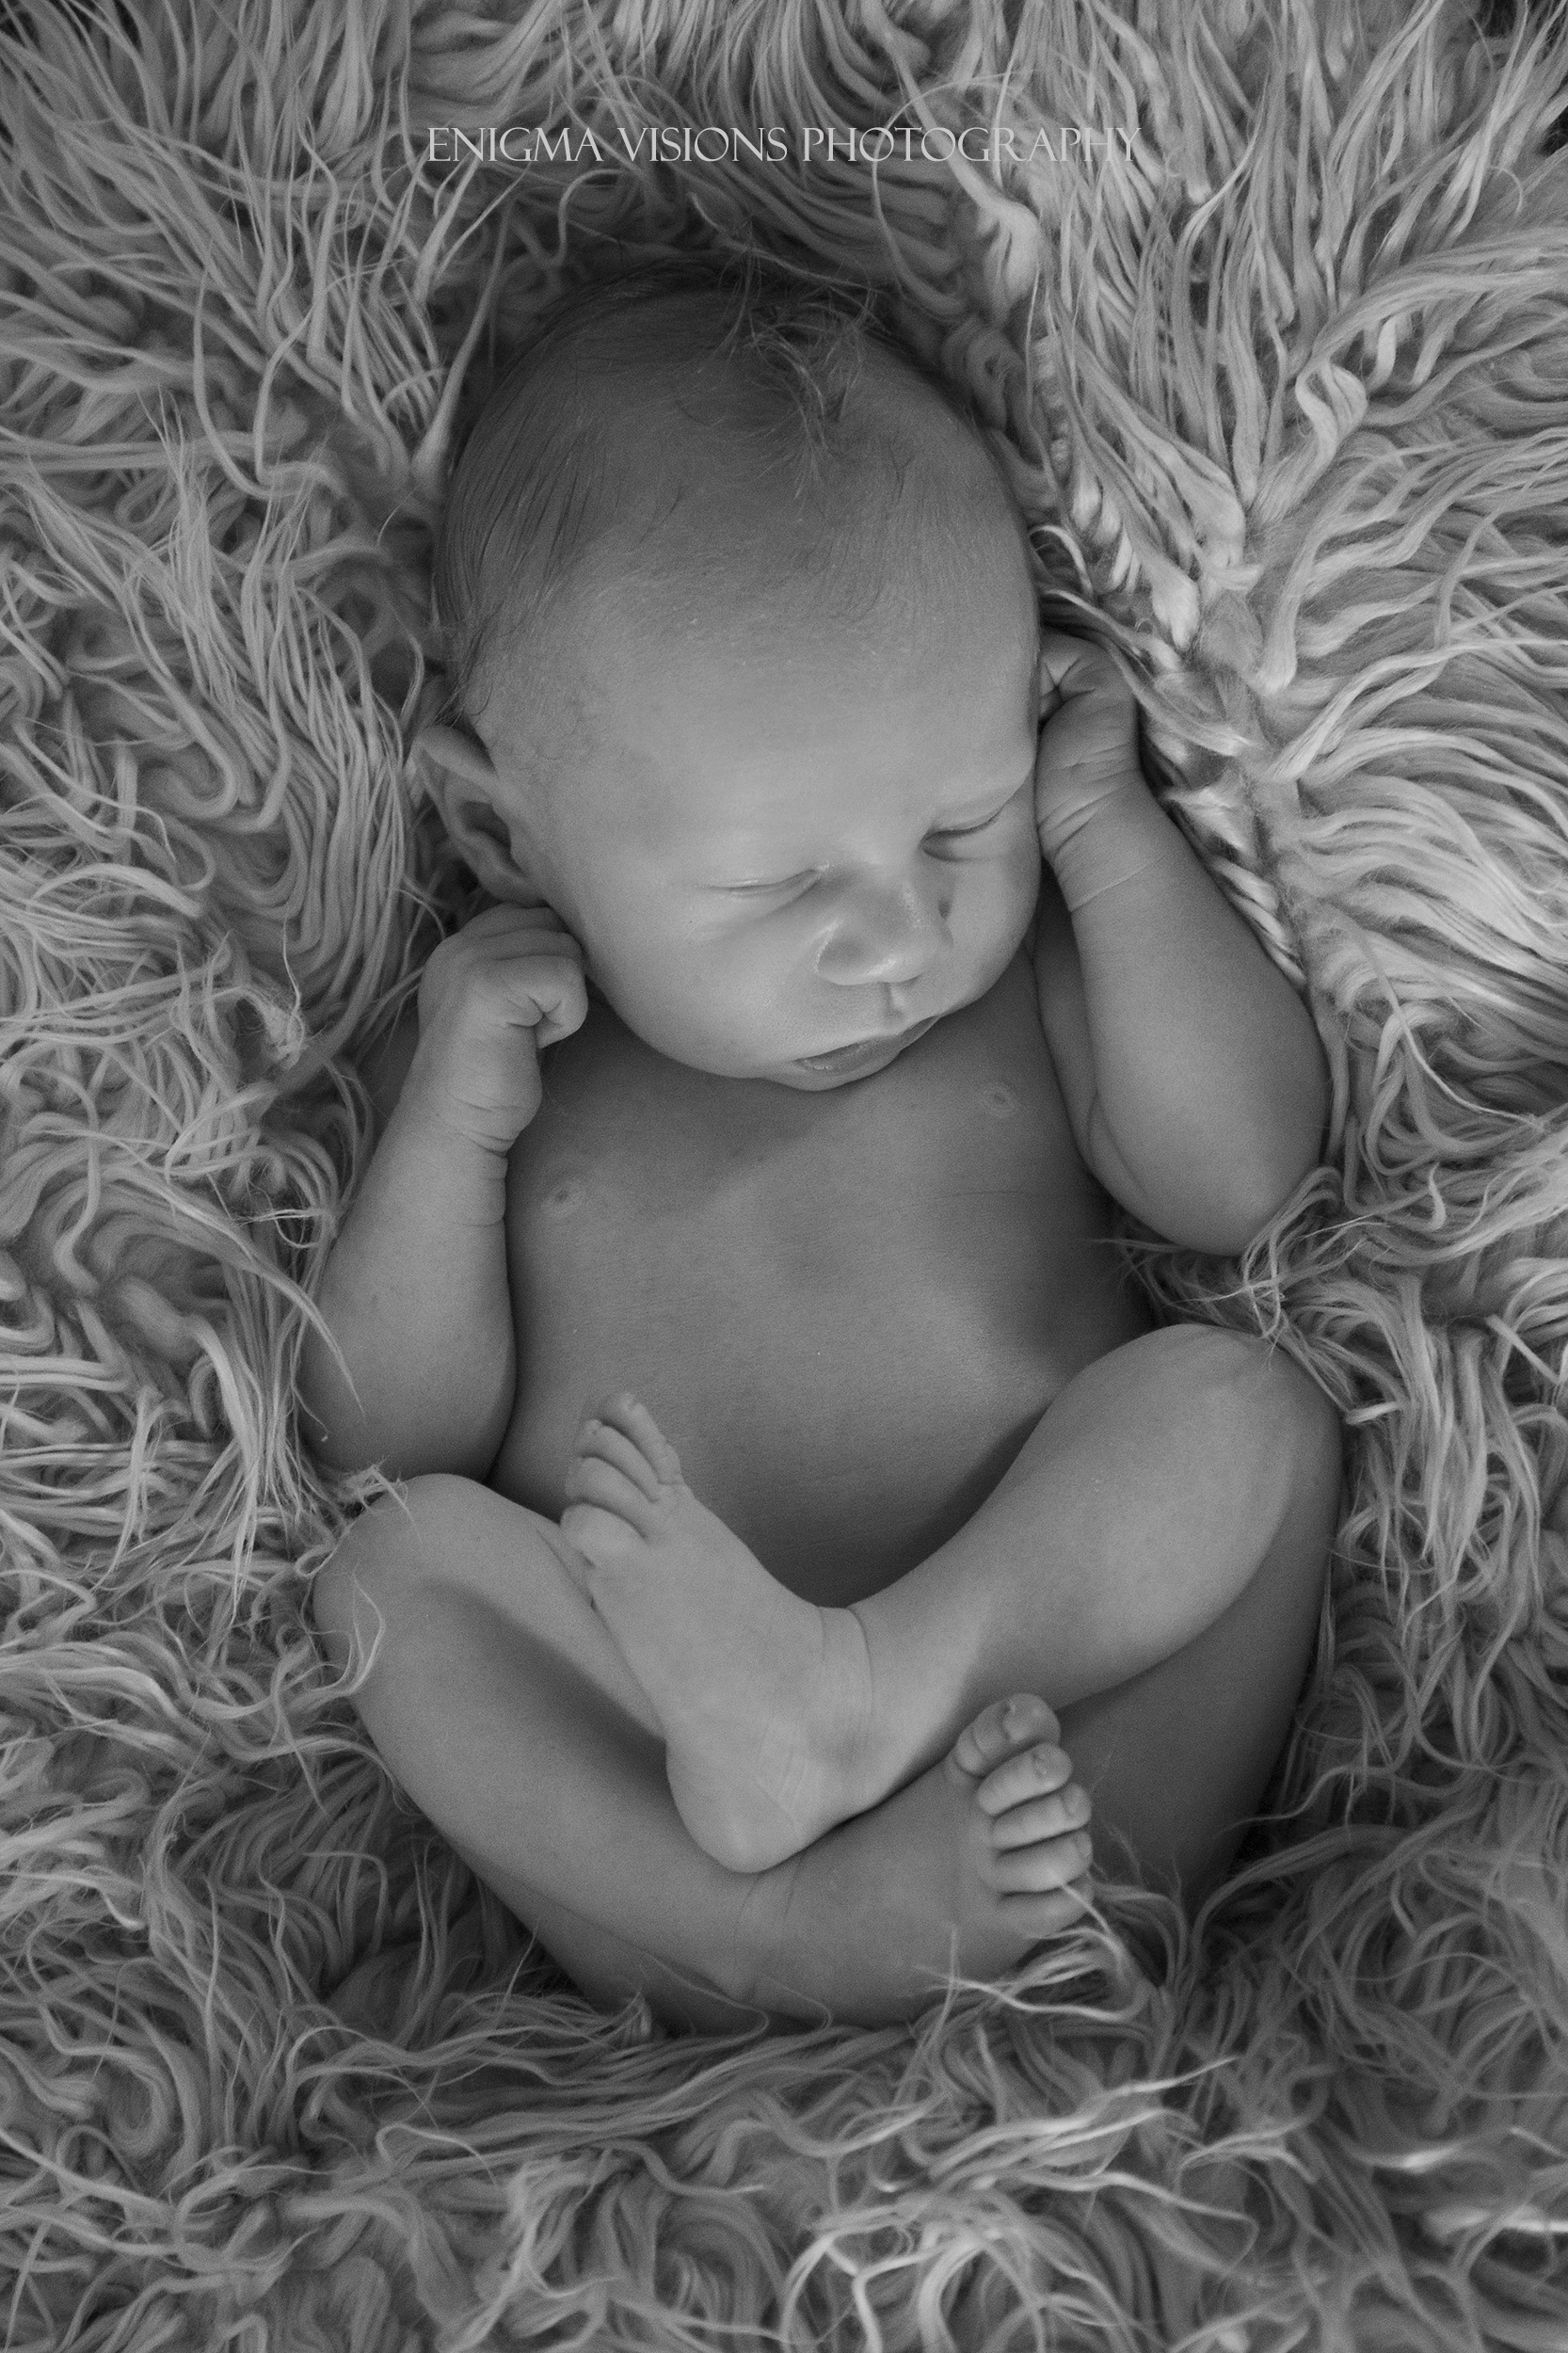 enigma_visions_photography_newborn_lifestyle_lux (4) copy.jpg